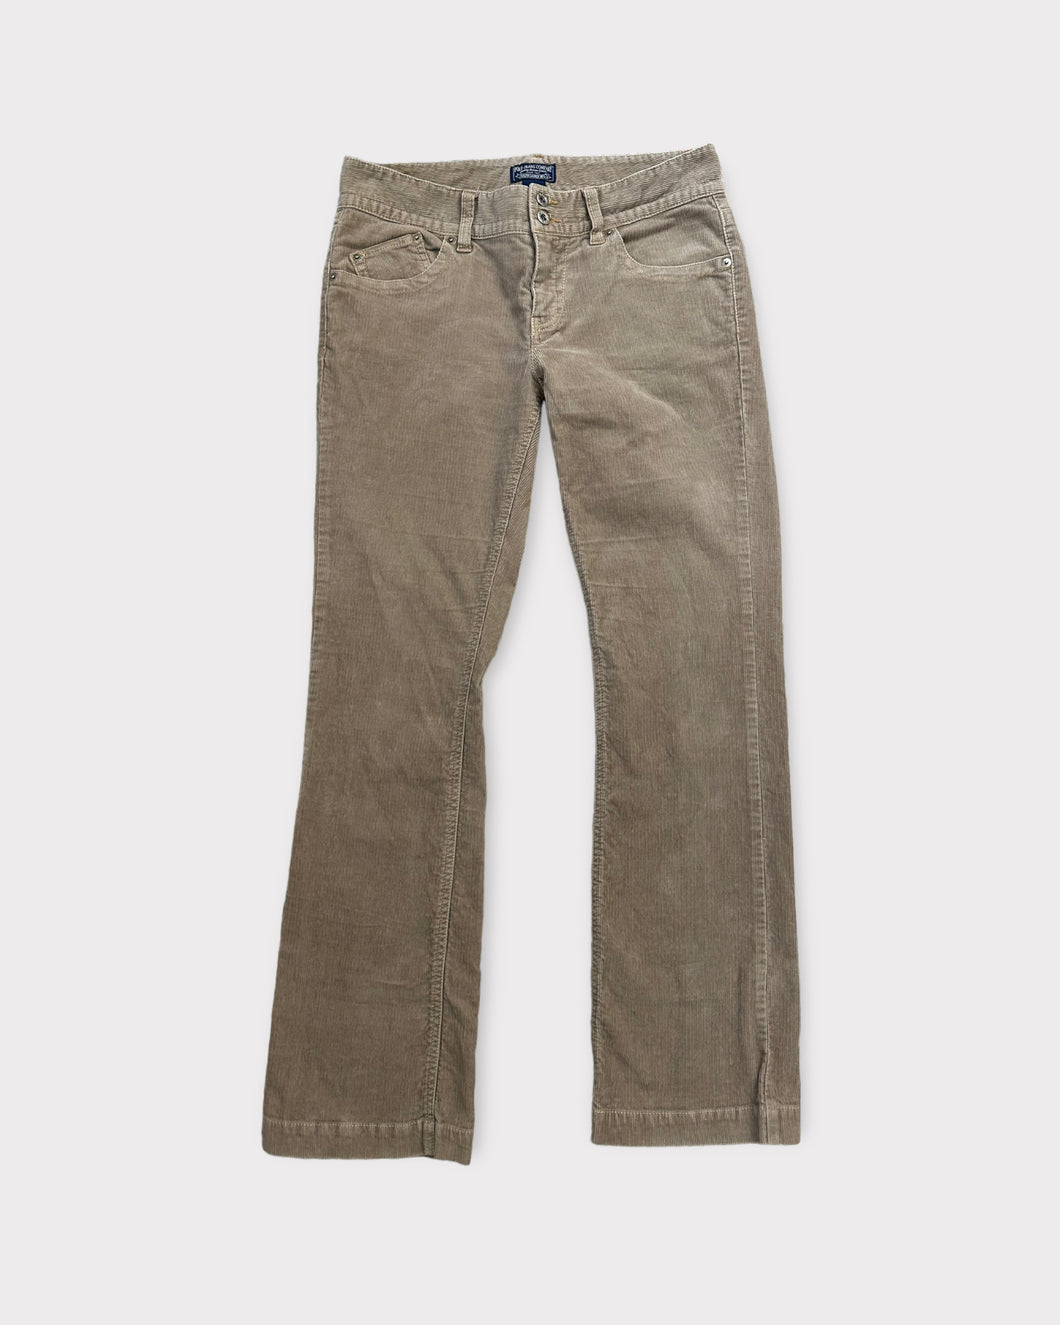 Ralph Lauren Polo Jeans Company Corduroy Relaxed Low Rise Pants (8)